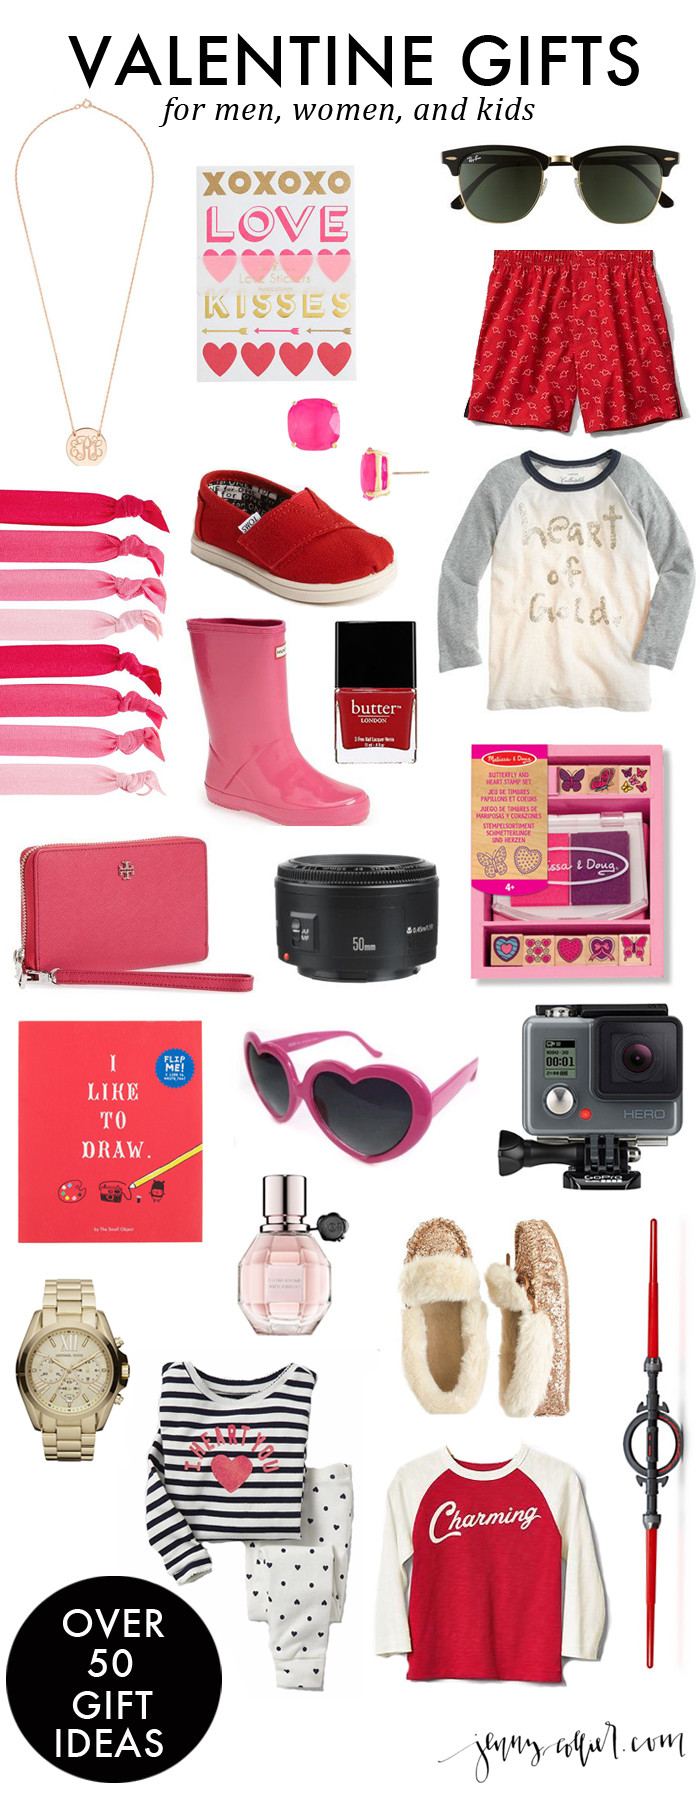 Valentine Gift Ideas For Women
 Valentine Gifts for Men Women and Kids